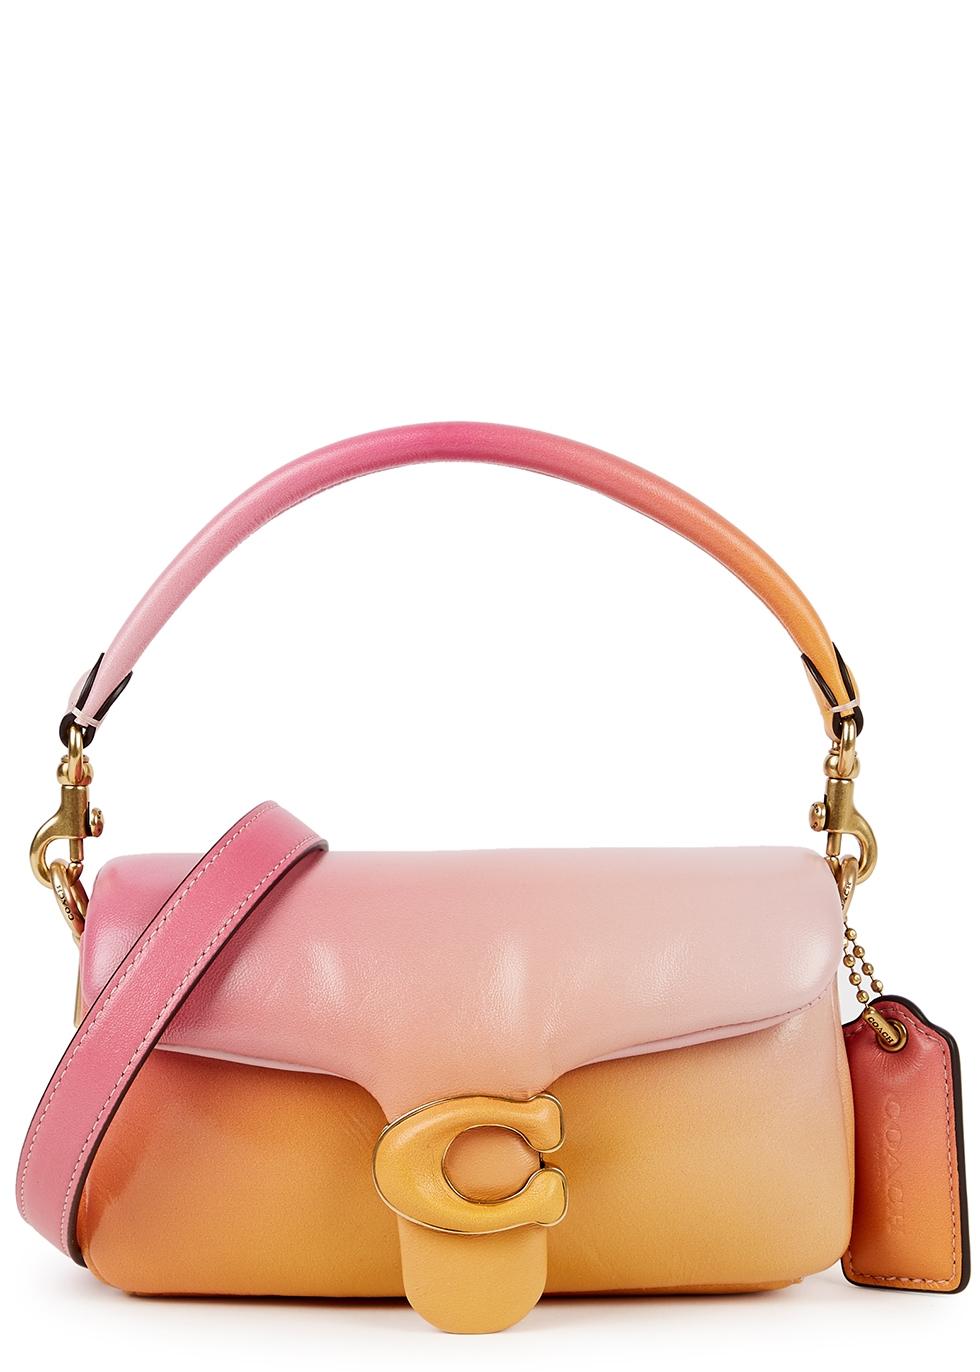 COACH Pillow Tabby 18 Ombré Leather Shoulder Bag in Pink | Lyst